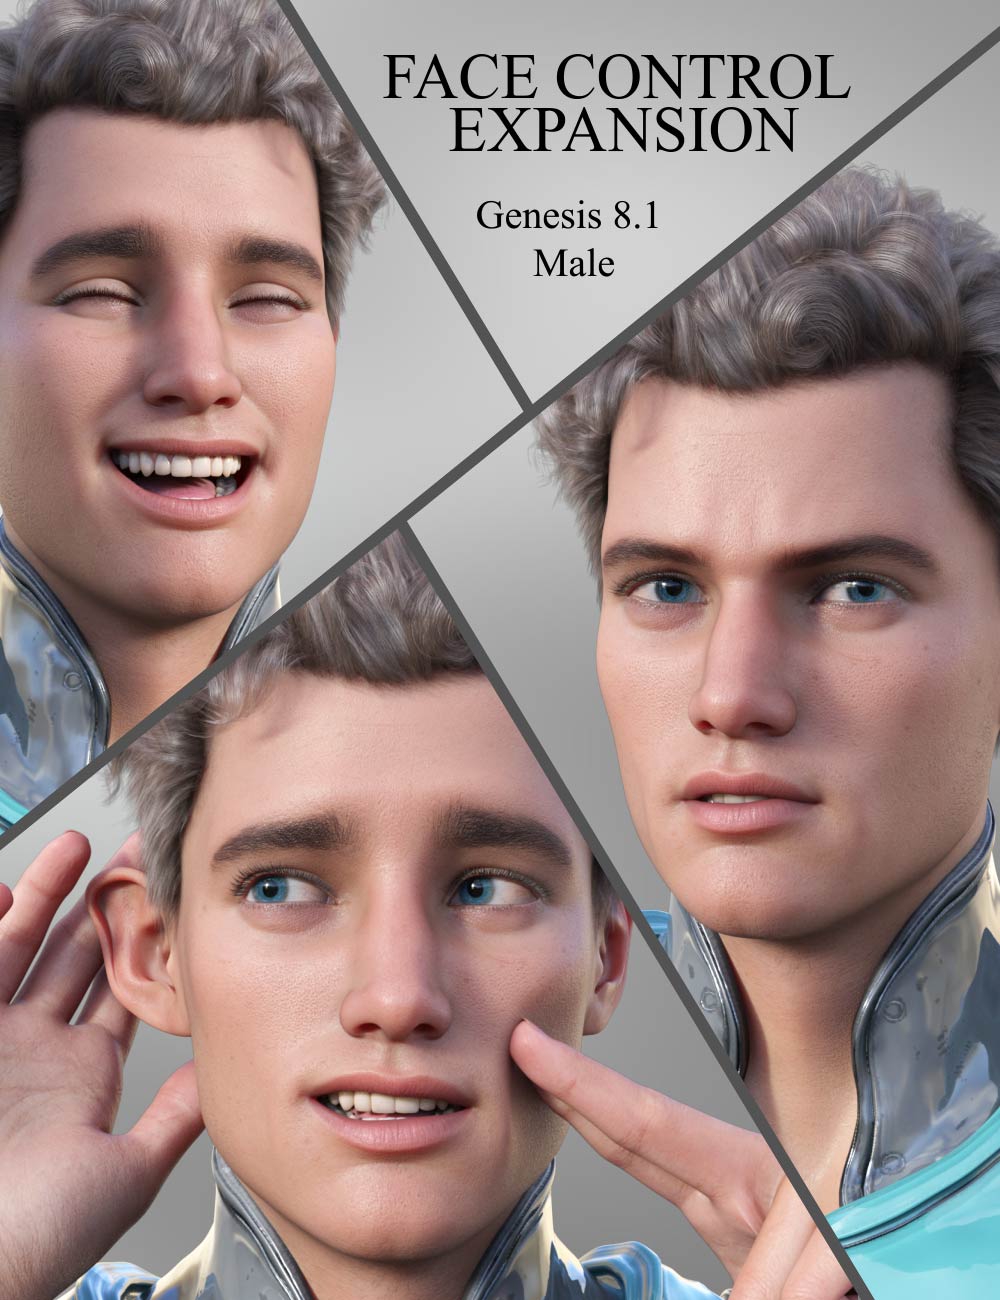 Face Control Expansion for Genesis 8.1 Male (Repost)